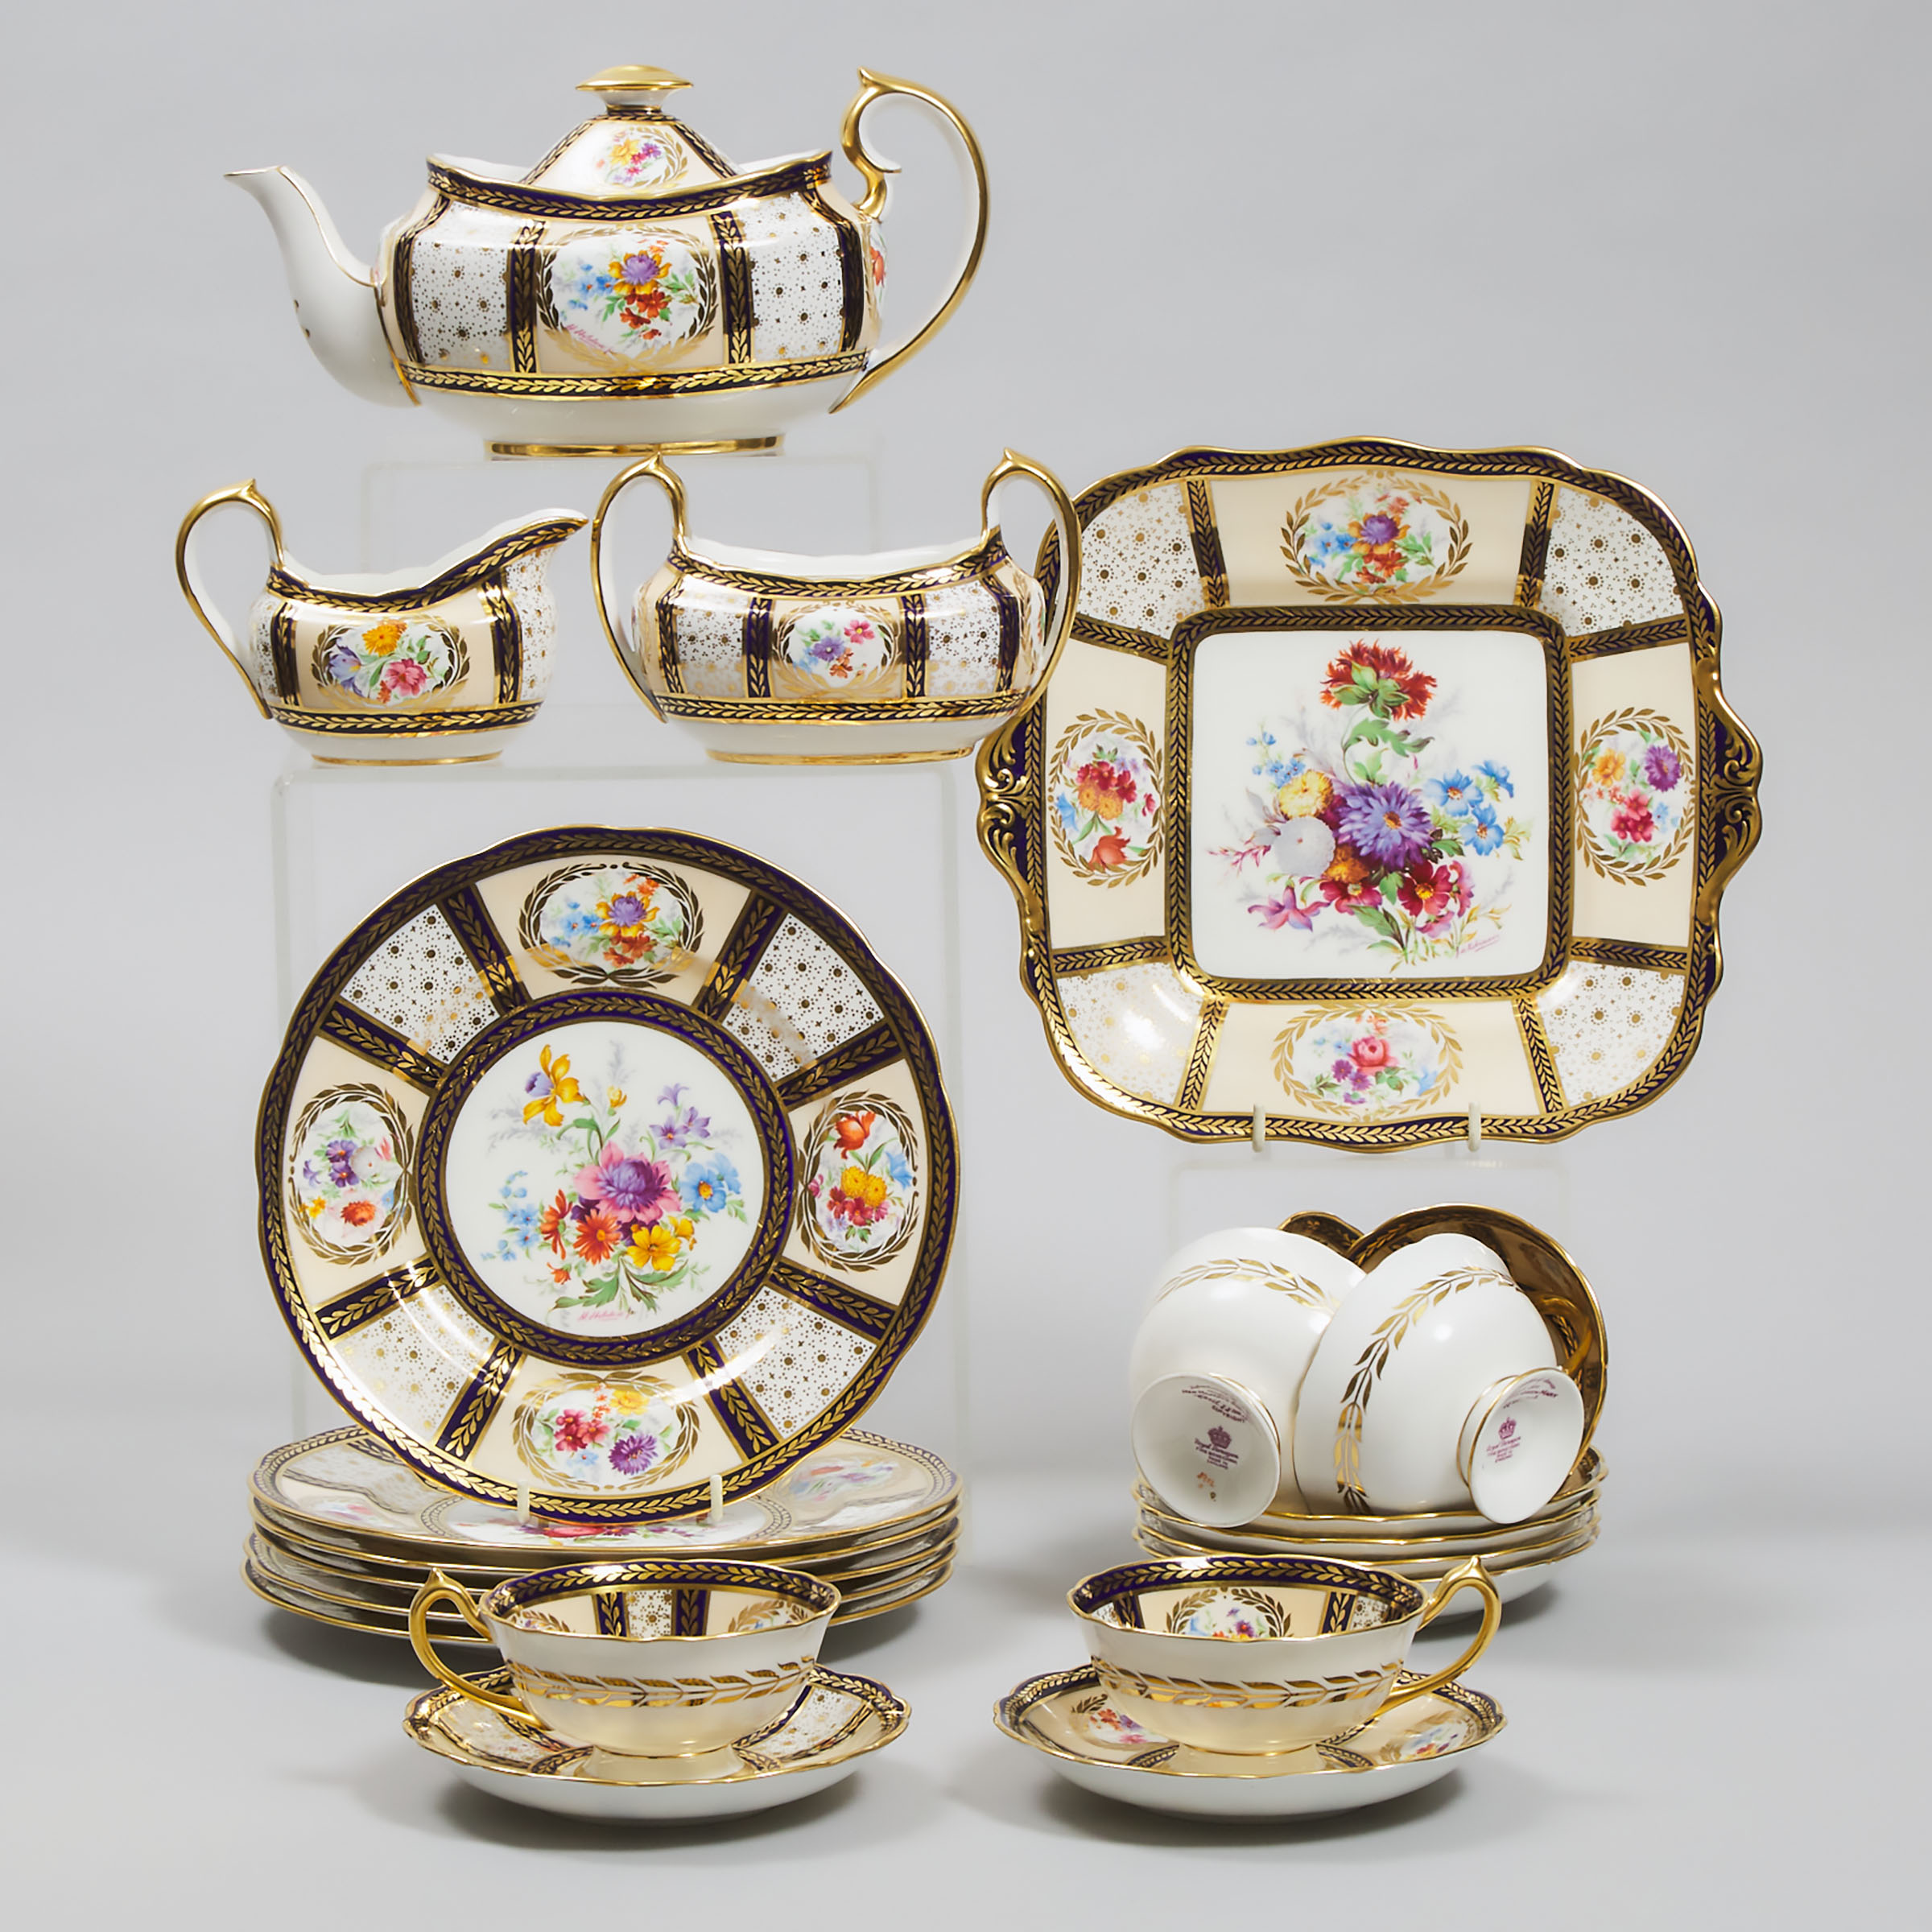 Royal Paragon 'Reproduction of Service made for Her Majesty Queen Mary' Tea Service, 20th century